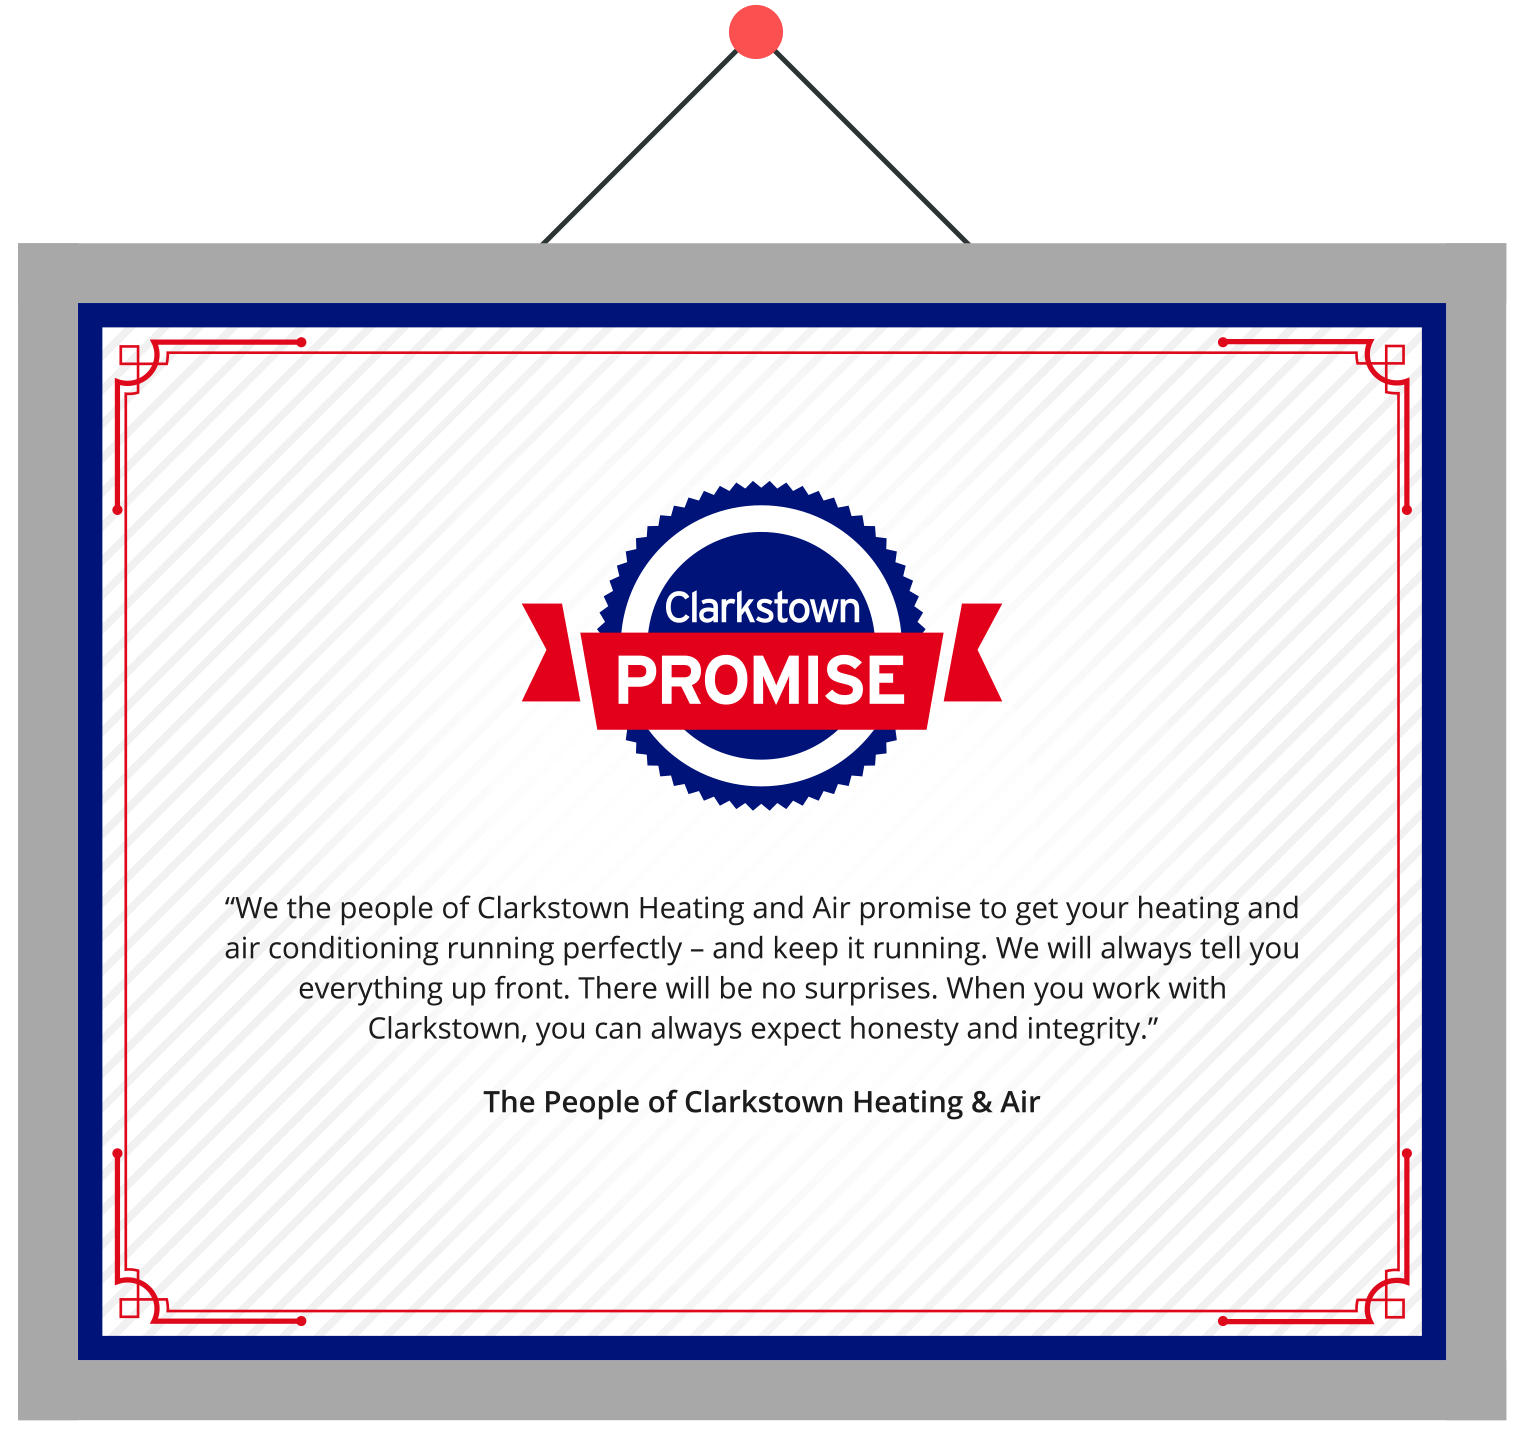 The Clarkstown Promise